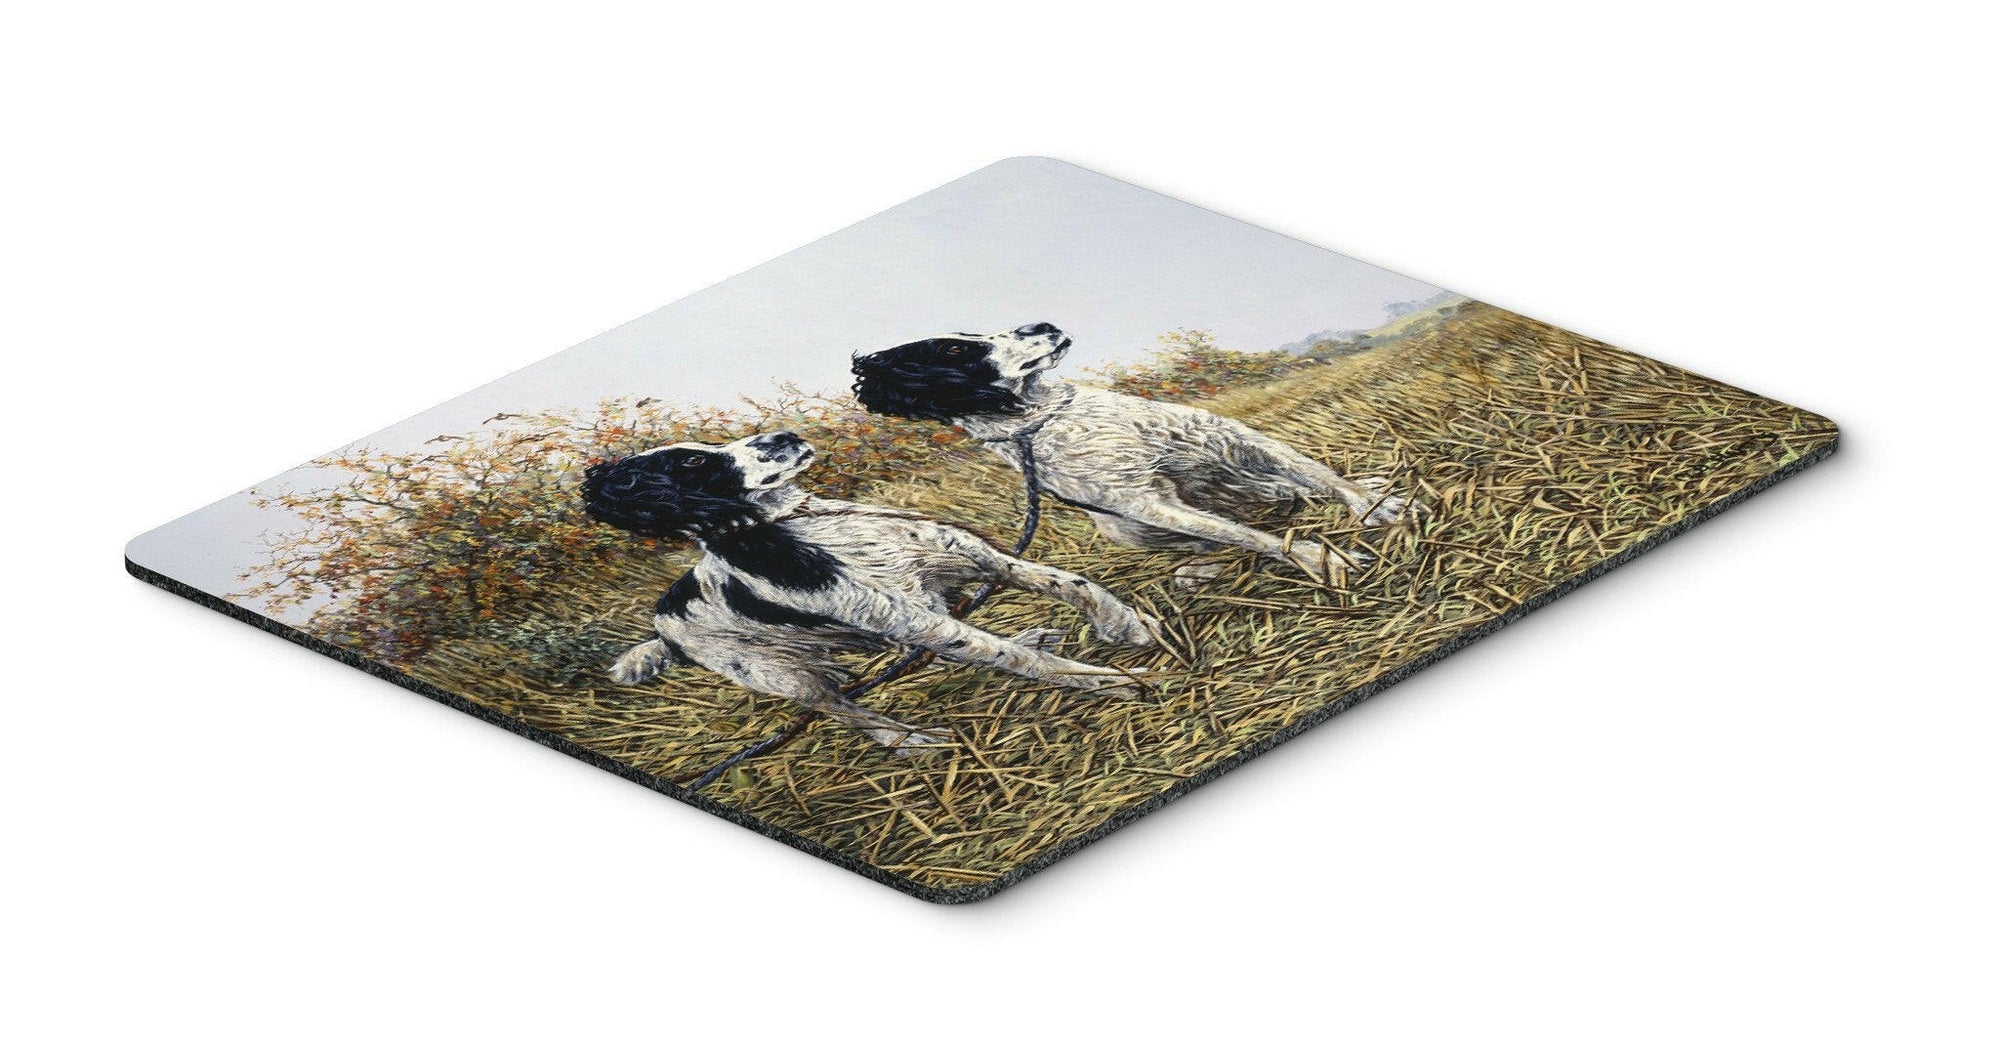 Two Springer Spaniels by Michael Herring Mouse Pad, Hot Pad or Trivet HMHE0001MP by Caroline's Treasures